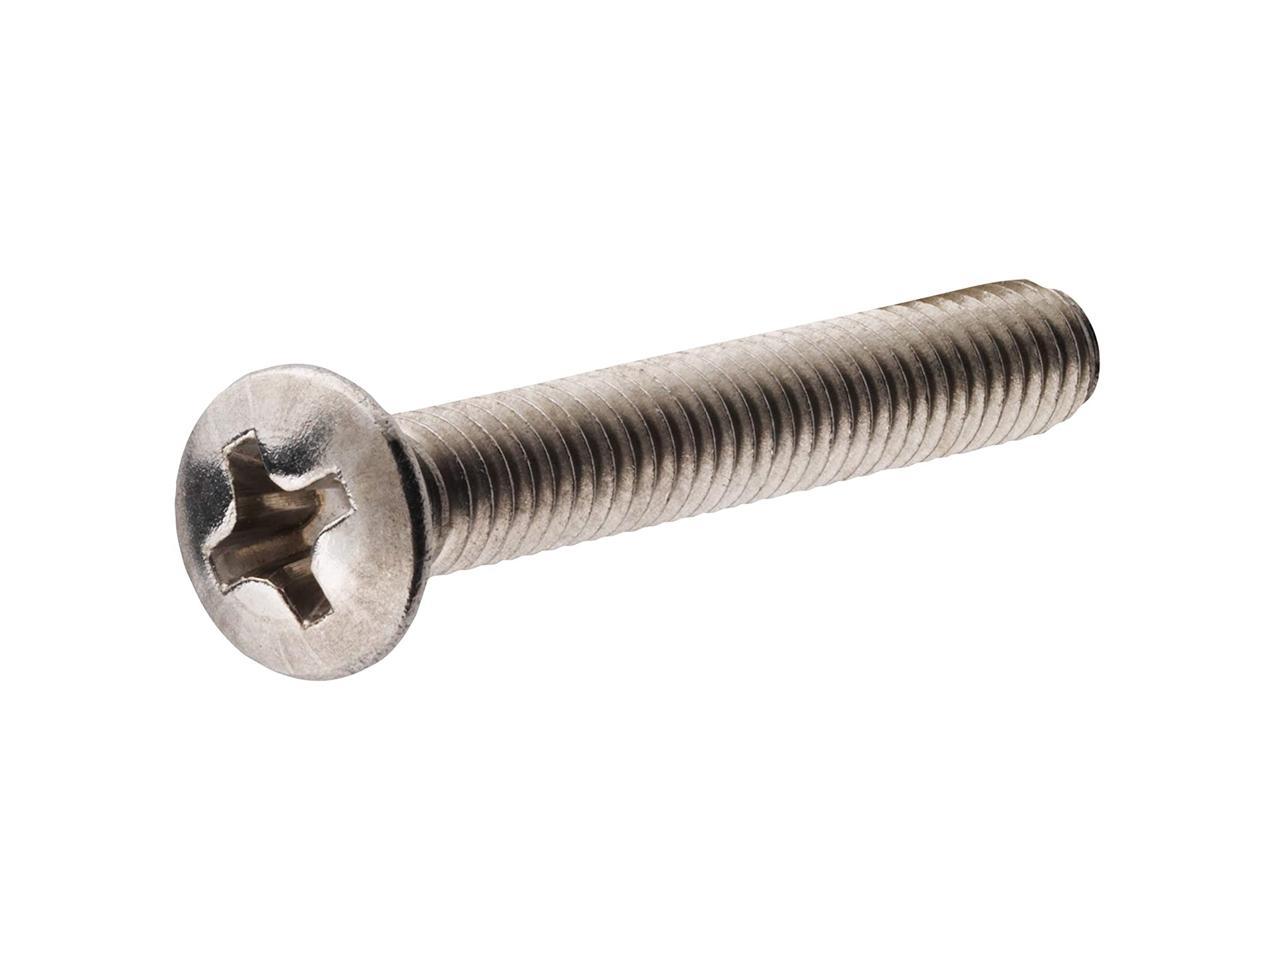 The Hillman Group 44132 10-24 x 4-Inch Oval Head Phillips Machine Screw,  Stainless Steel, 15-Pack - Newegg.com